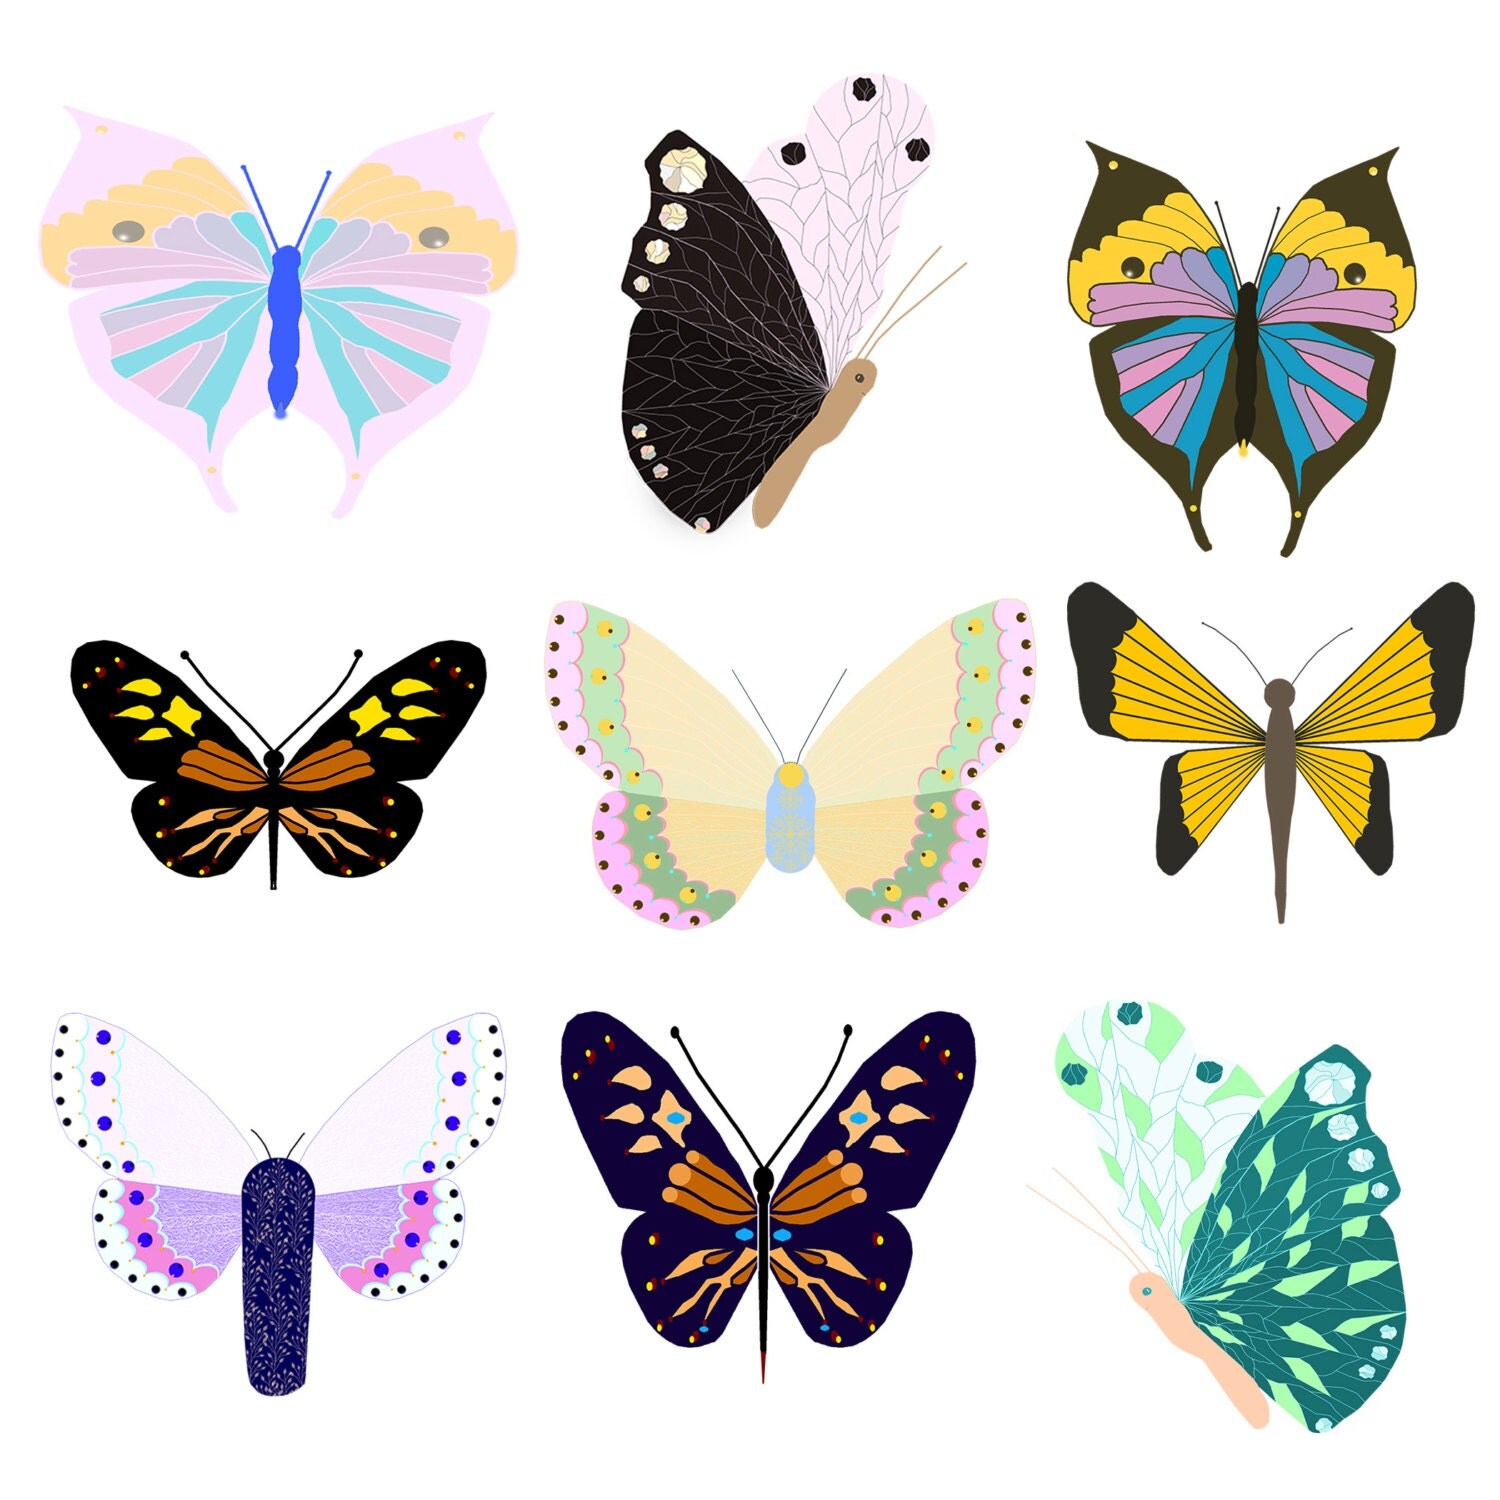 Butterfly Cliparts Cute Unique Butterflies Clipart Insects